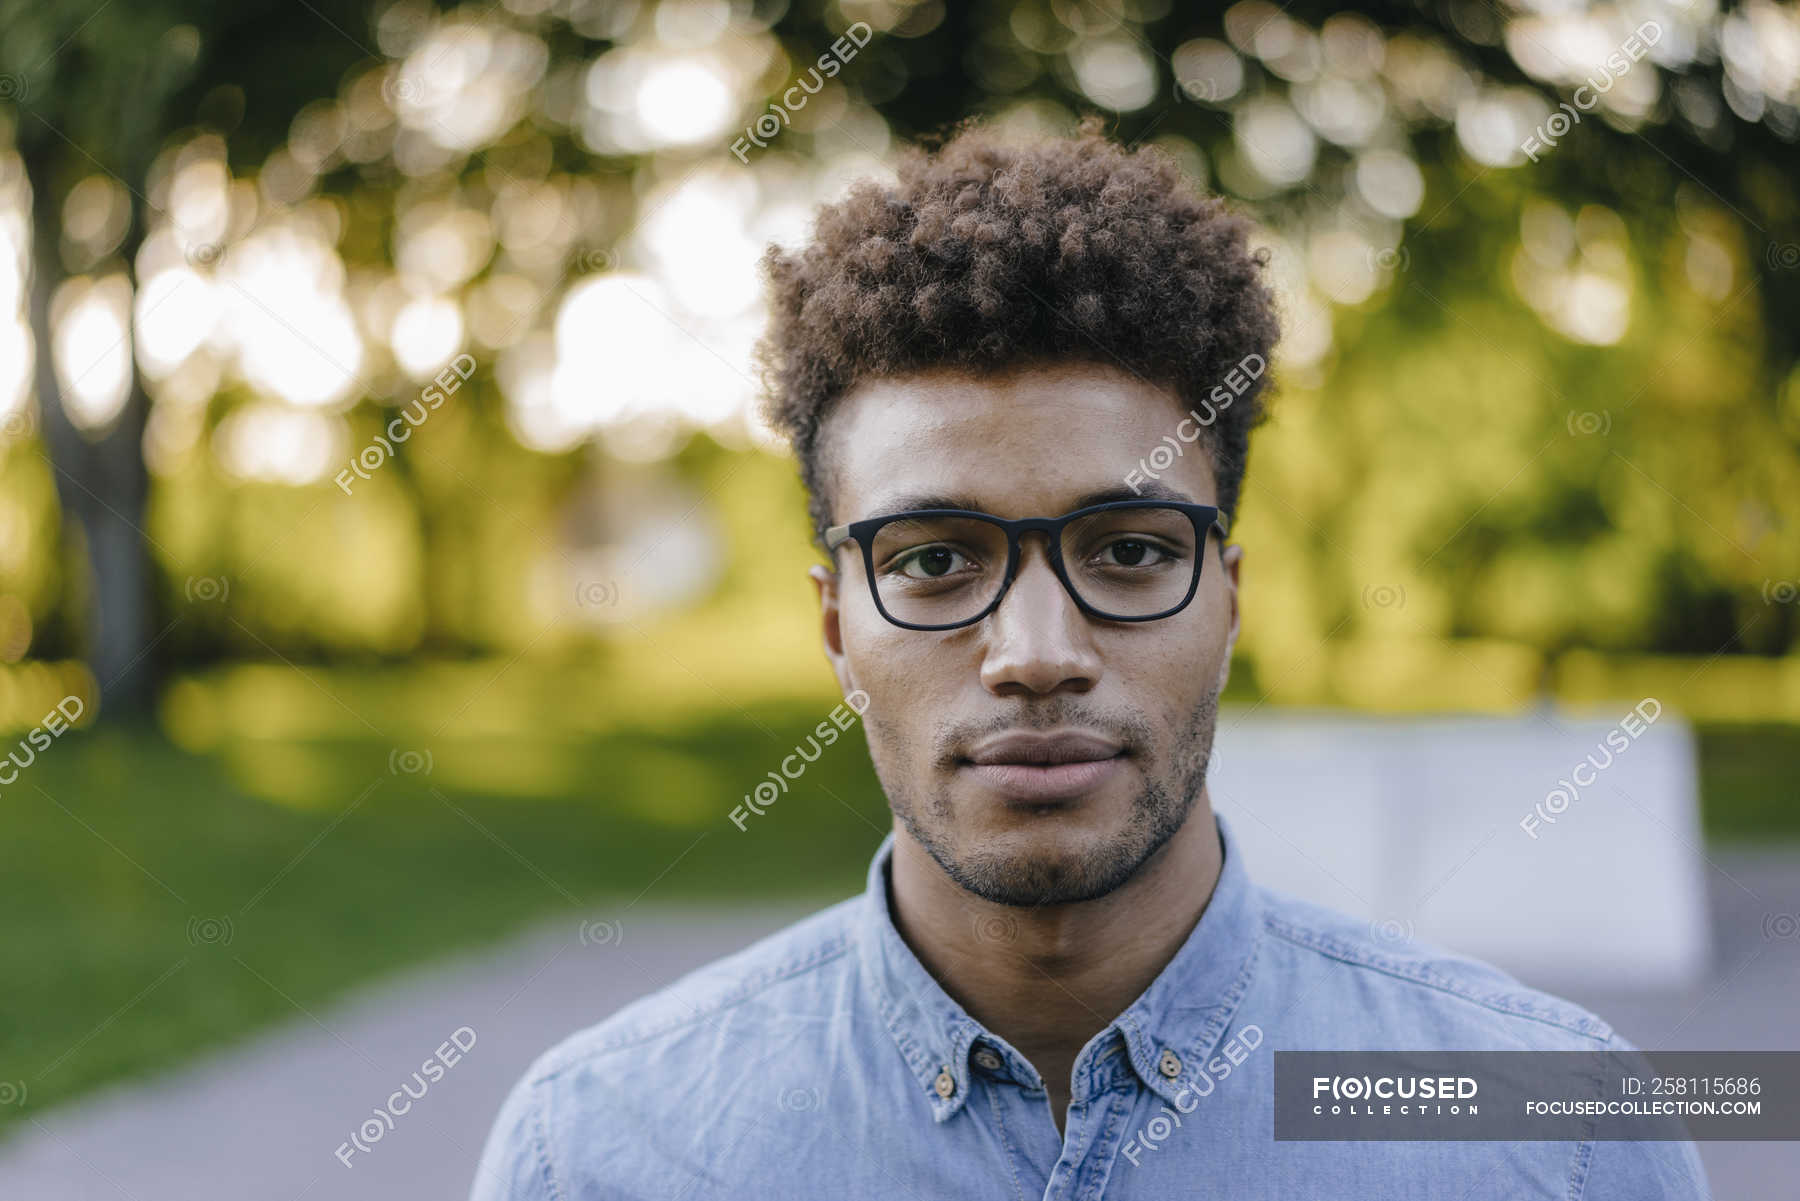 Portrait of young african american man wearing glasses in park — shirt,  student - Stock Photo | #258115686